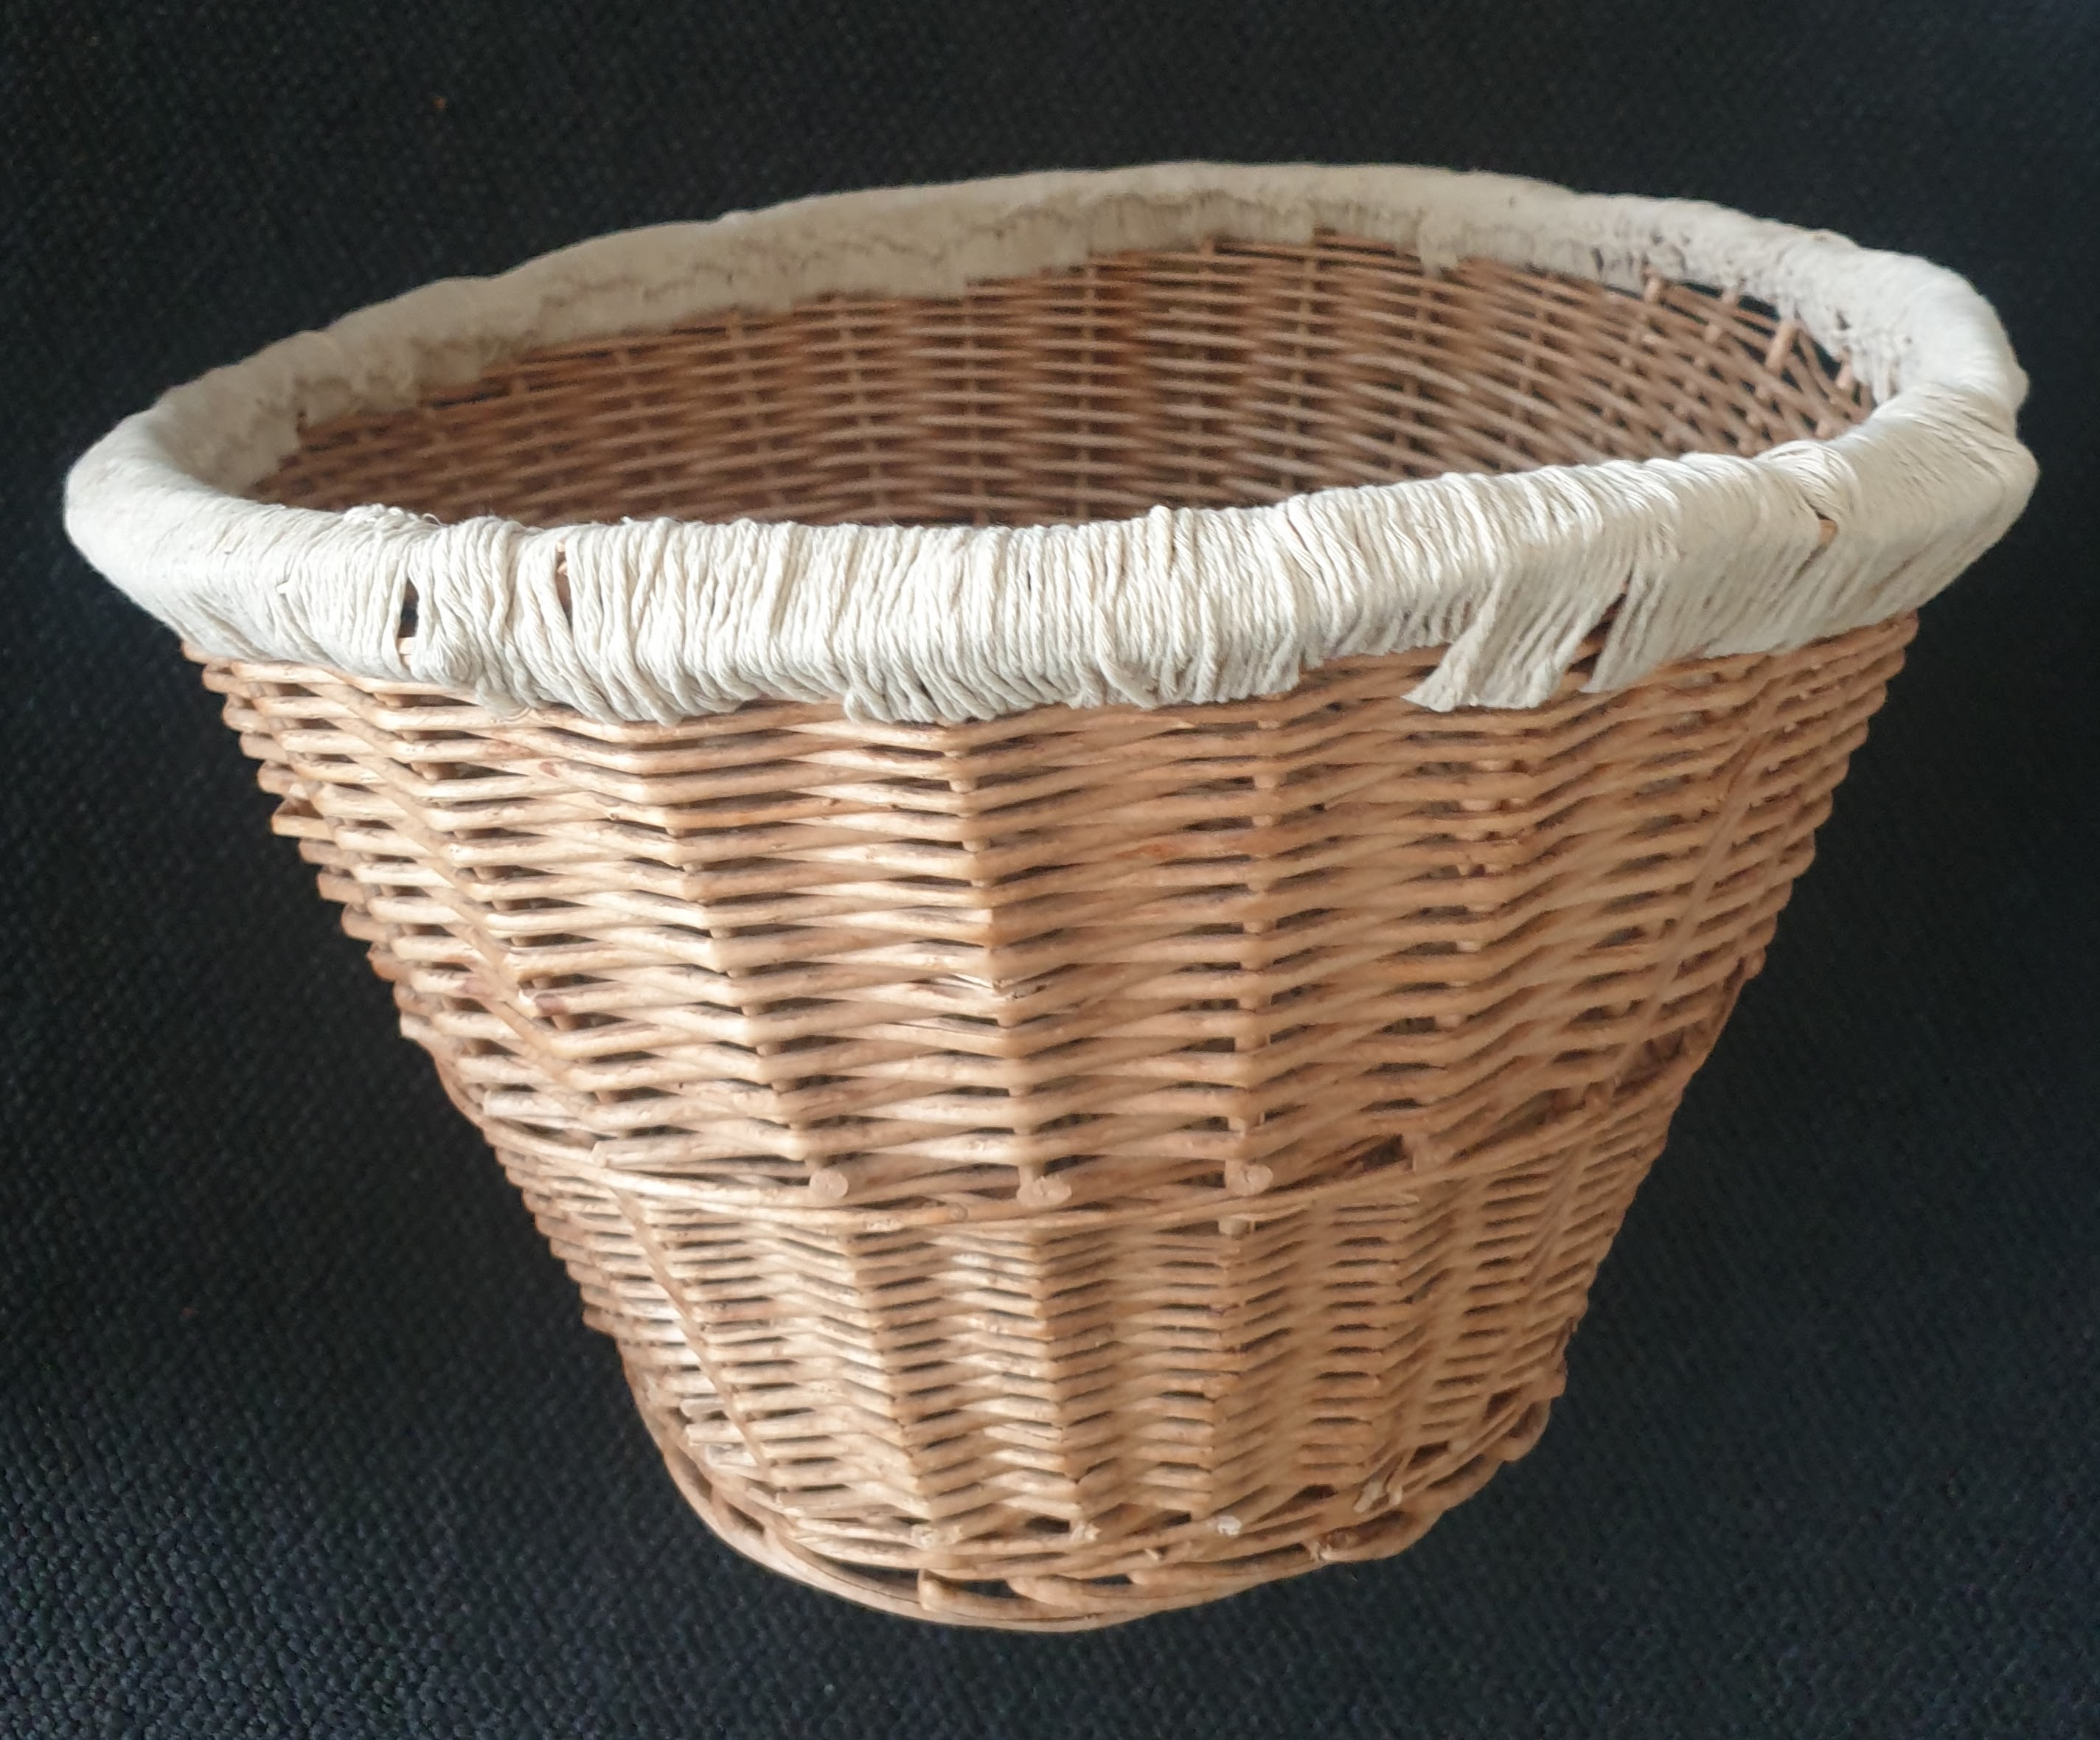 Side view of a wicker basket with crochet edging completed in a tan colour. There are no visible handles.